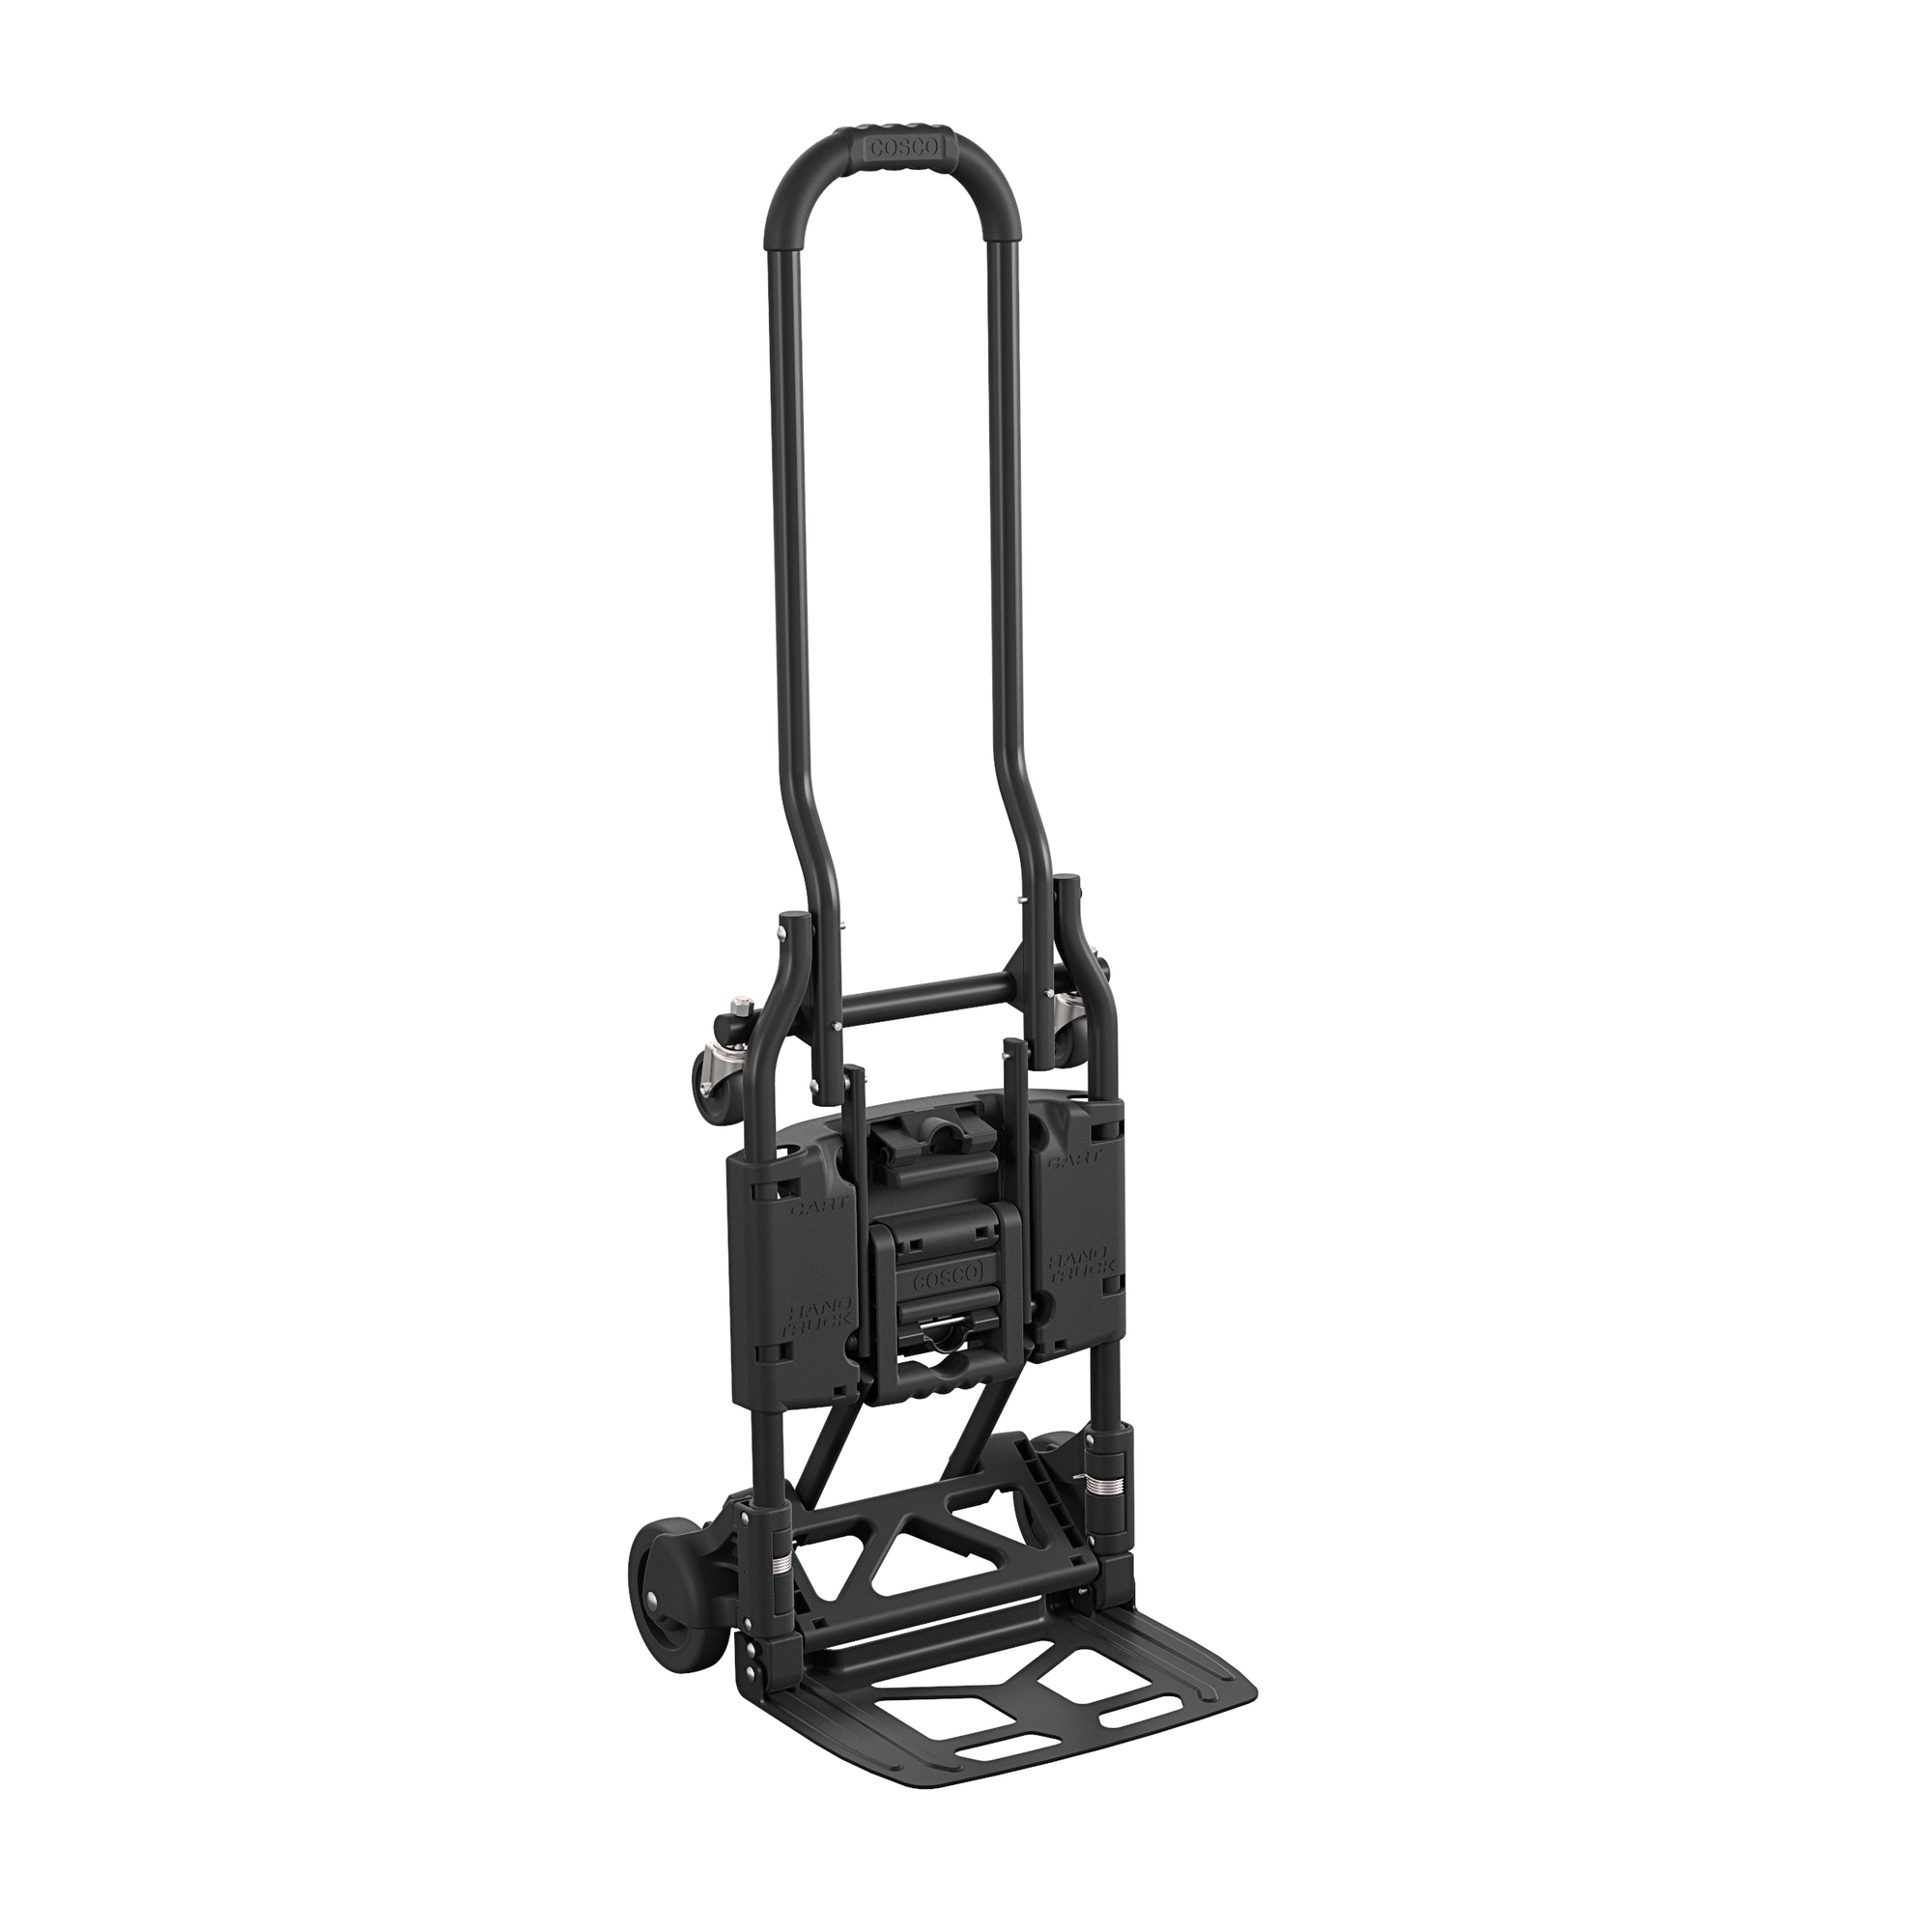 Cosco, 2Inch1 Folding Hand Truck,Multi-Position w/Toe Plate, Load Capacity 300 lb, Height 34.6 in, Material Carbon Steel, Model 12223BLK4